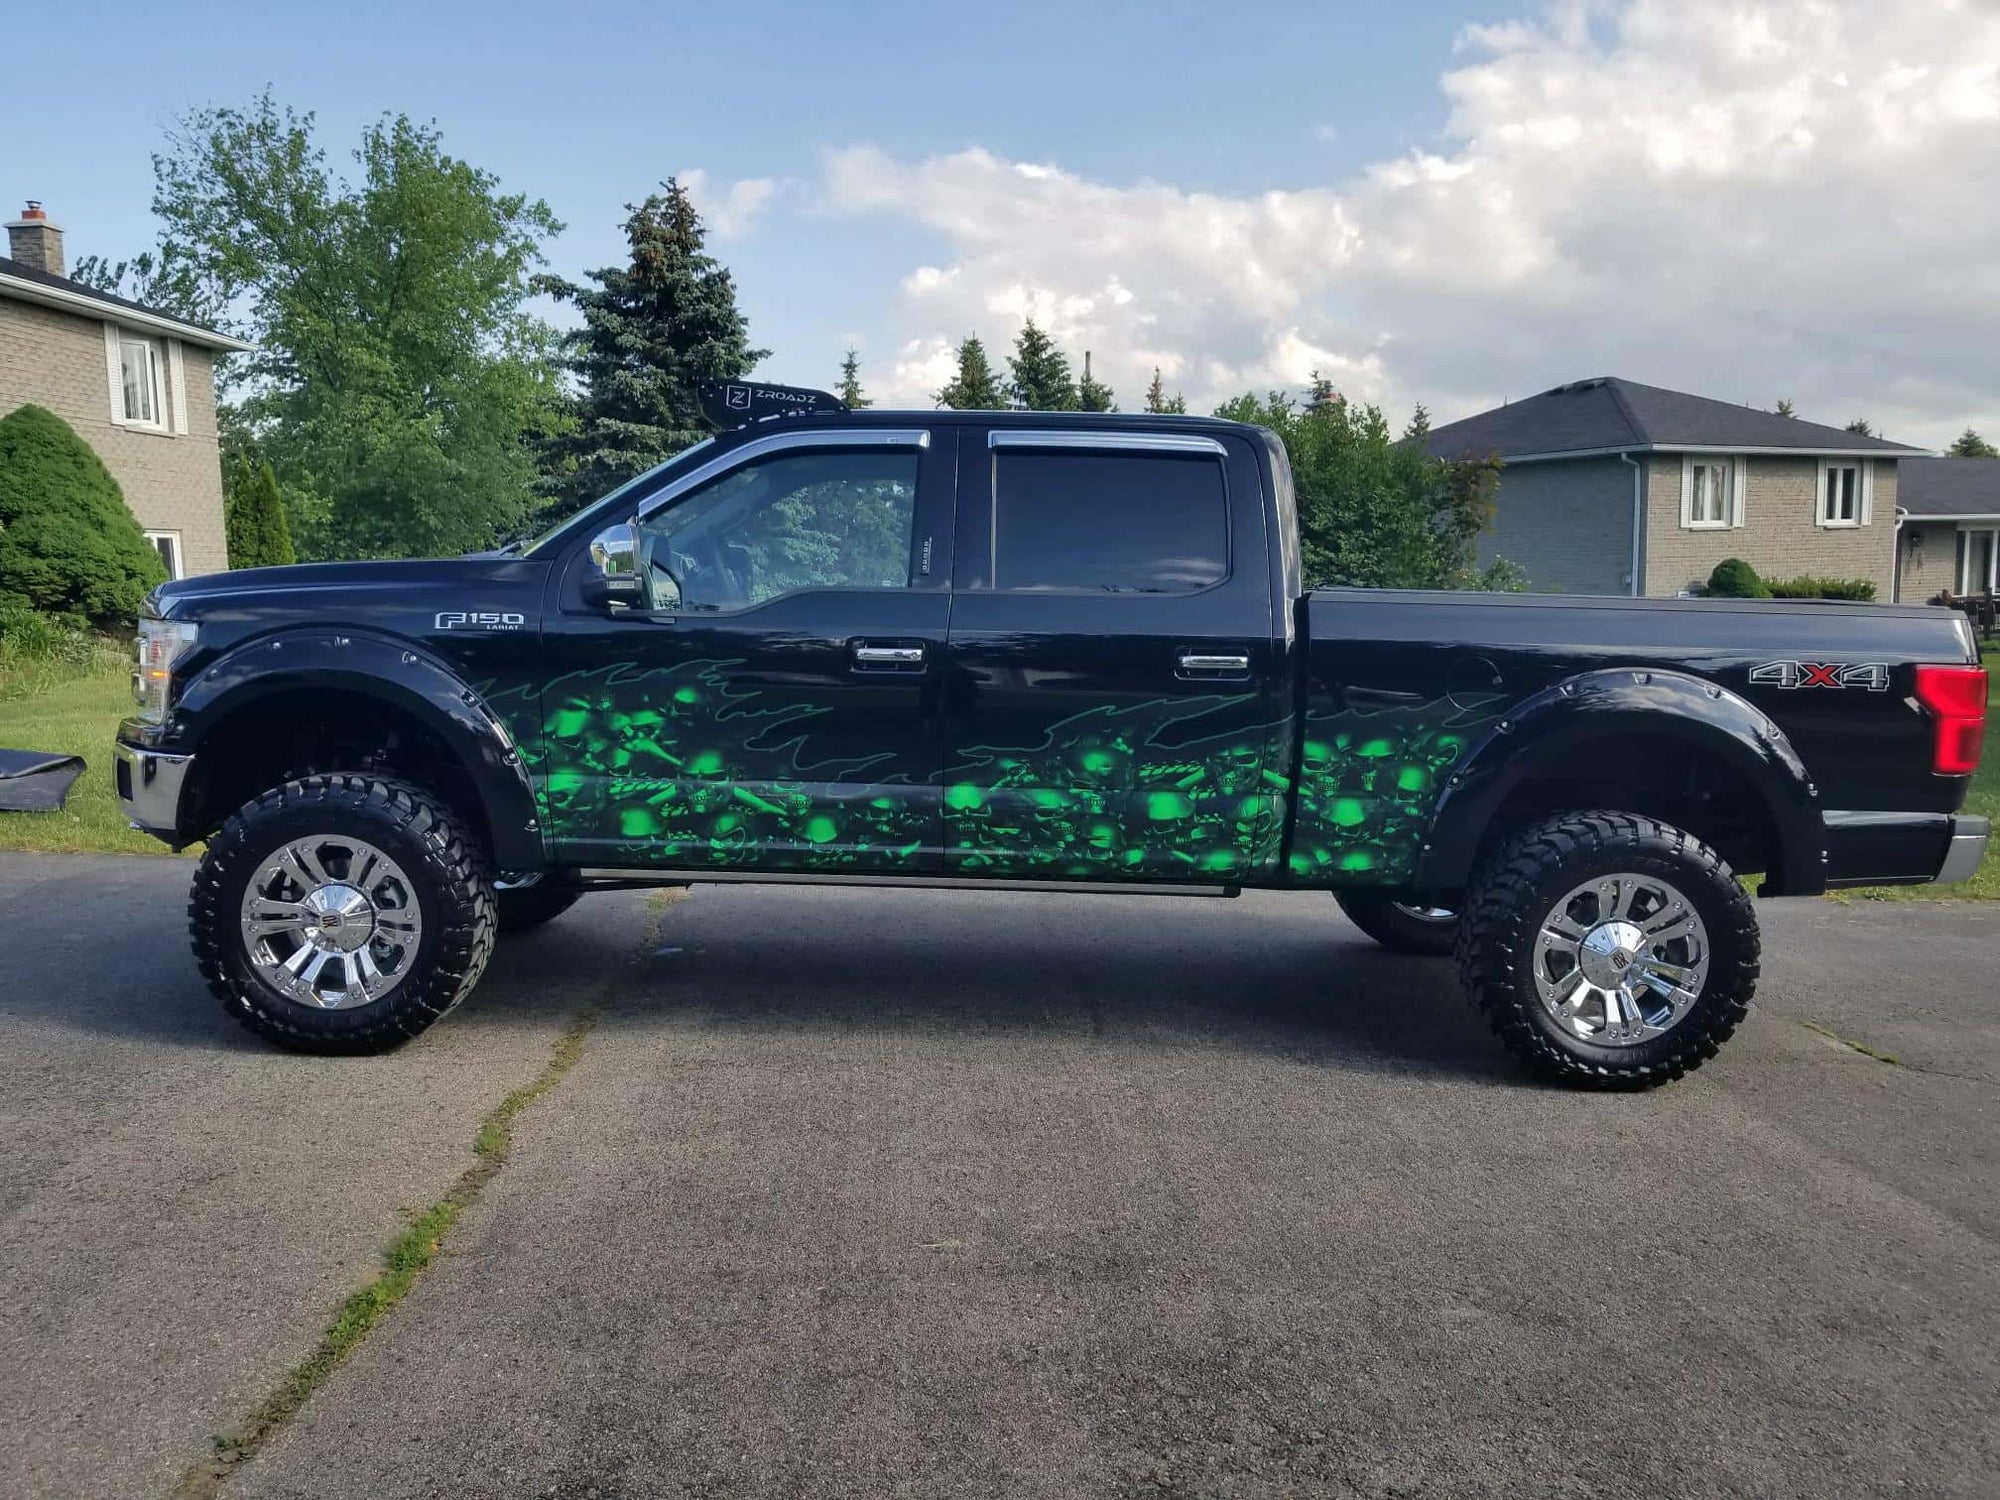 Bright green skulls wave half wrap on the side of a black pick up truck